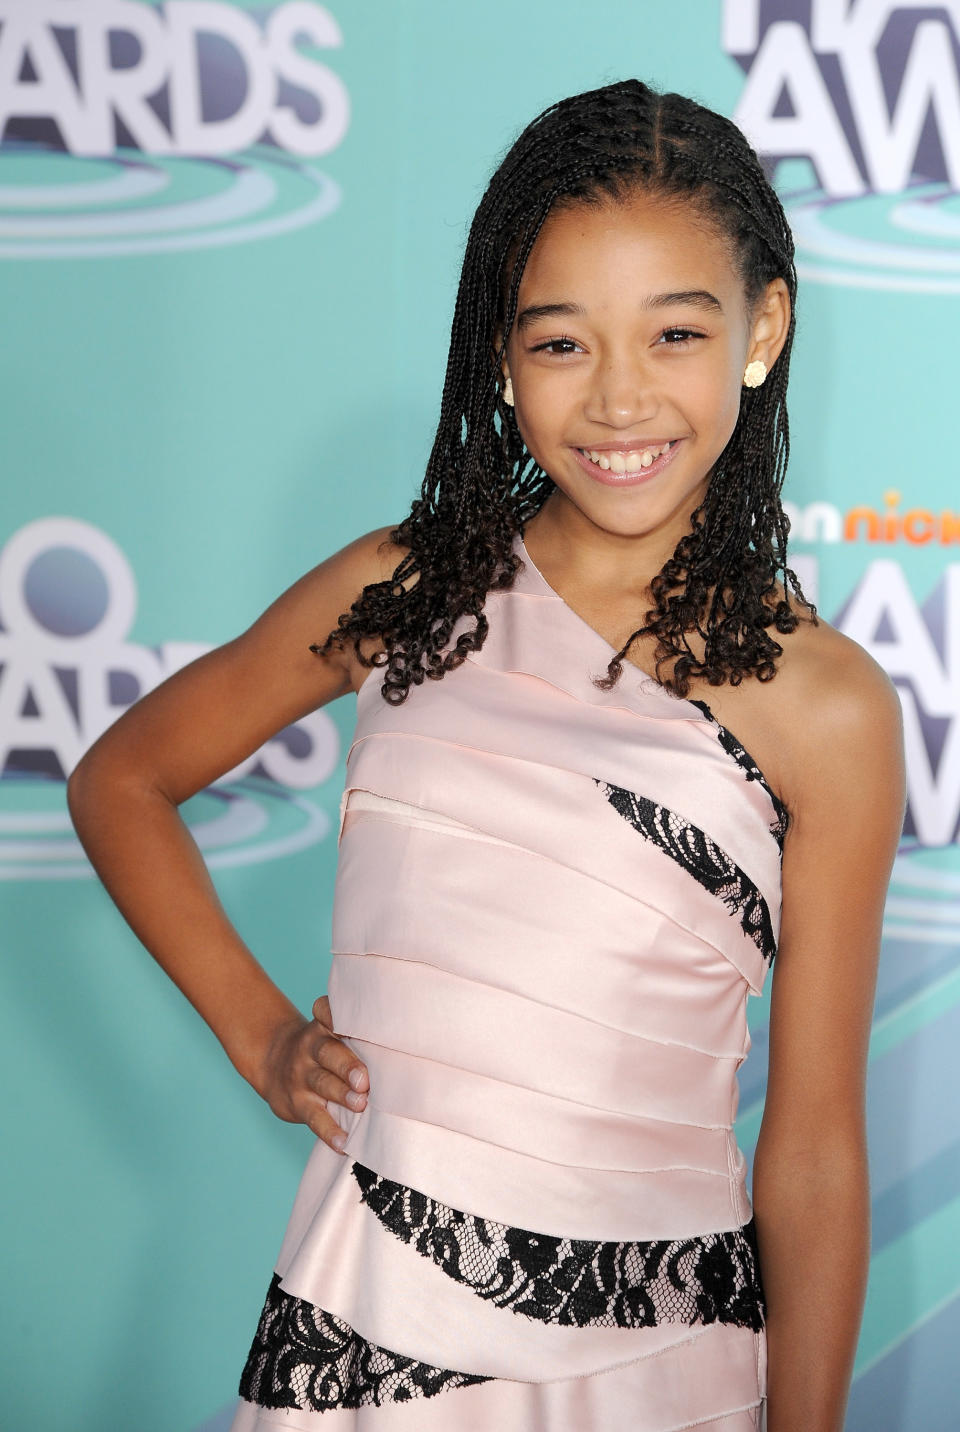 young Amandla at an event smiling